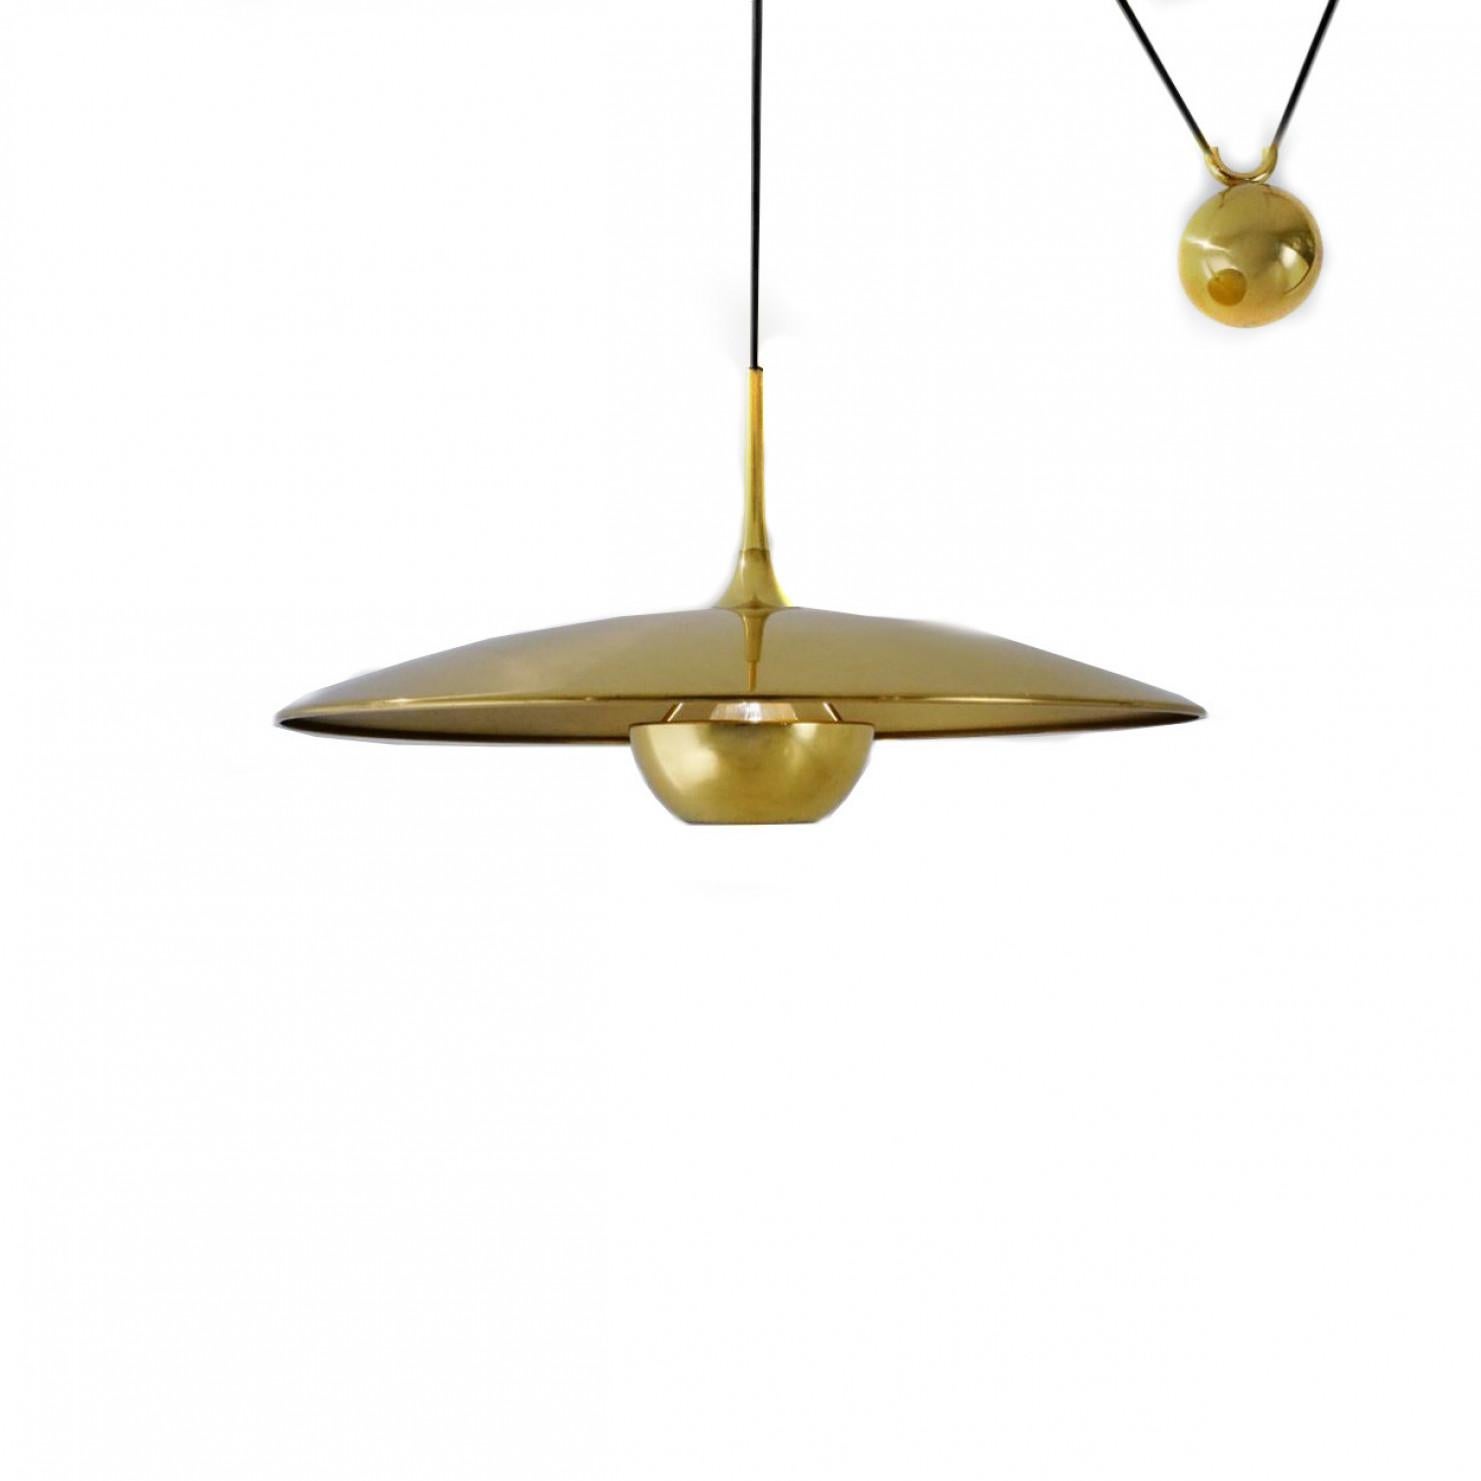 Fantastic Florian Schulz counter balance pendant by Florian Schulz. Design period: 1970-1979, production period: 2022.
The lackered brass pendant is suspended with his own brass ball counter balance. One canopy supports the pendant. The light is